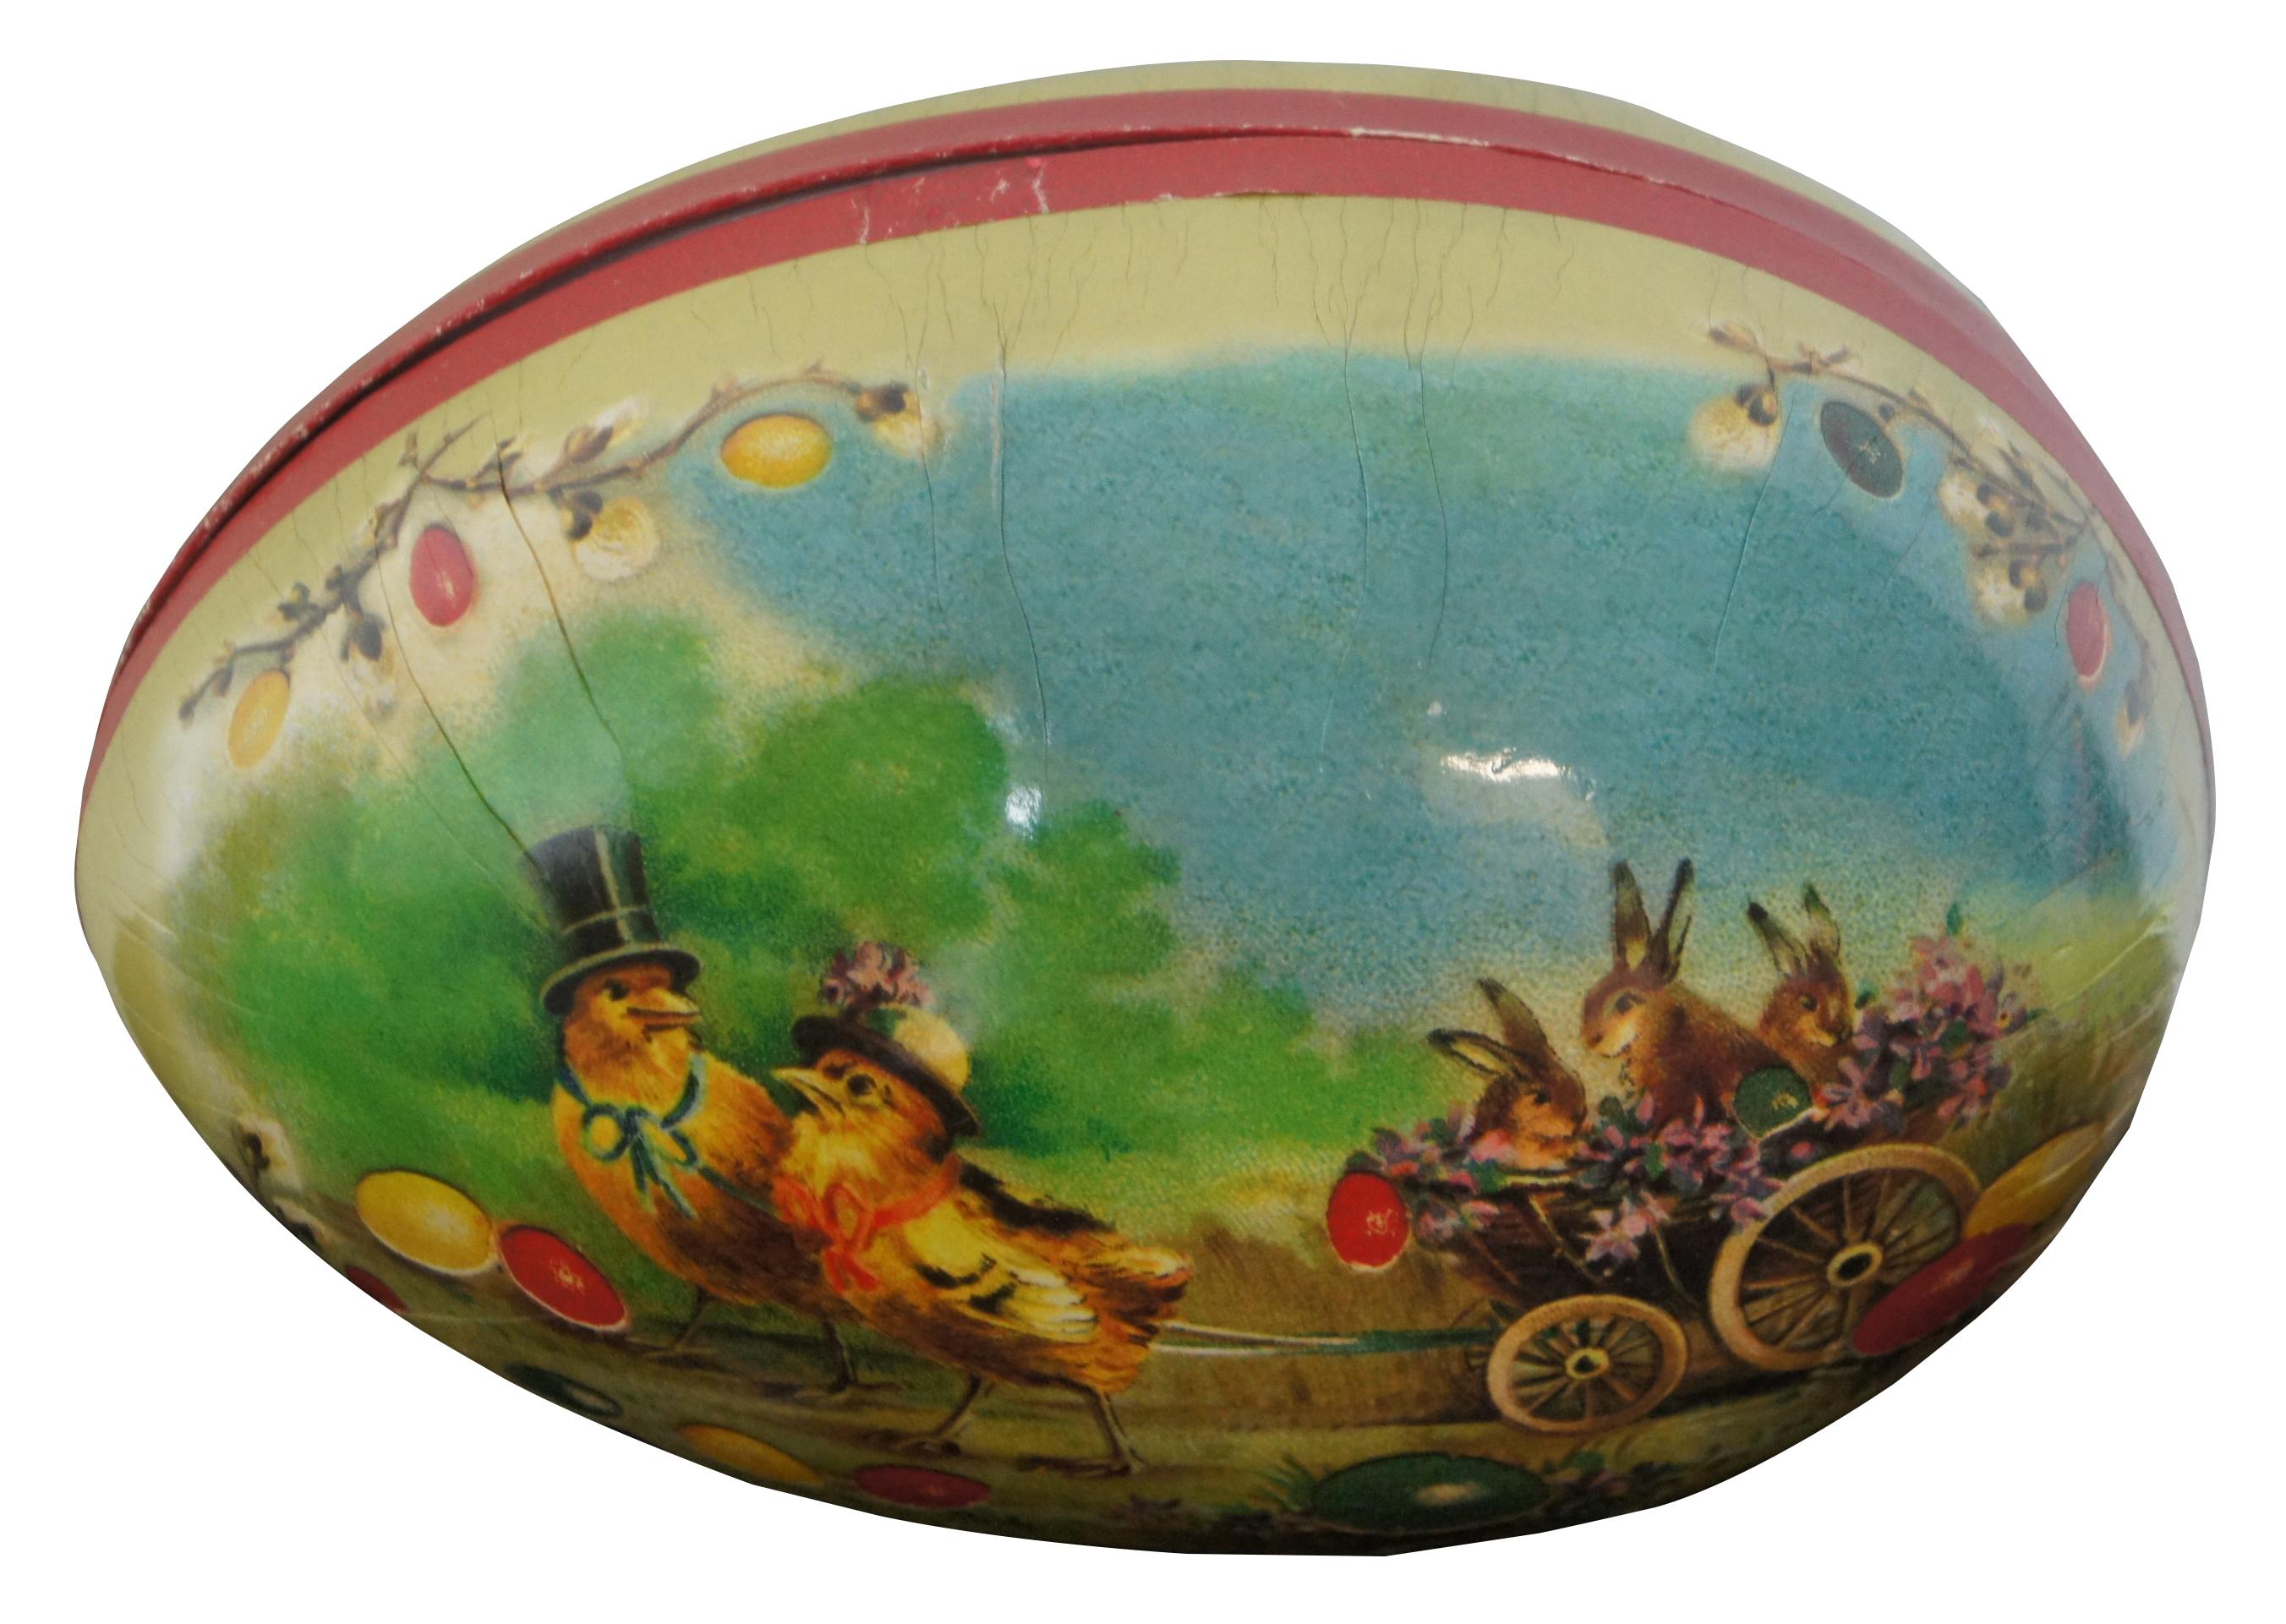 Antique German papier mâché Easter egg candy container, featuring a lithograph landscape with Easter eggs and pair of chicks in their Sunday best hats pulling a small cart containing flowers and three bunnies. Measure: 7”.
 